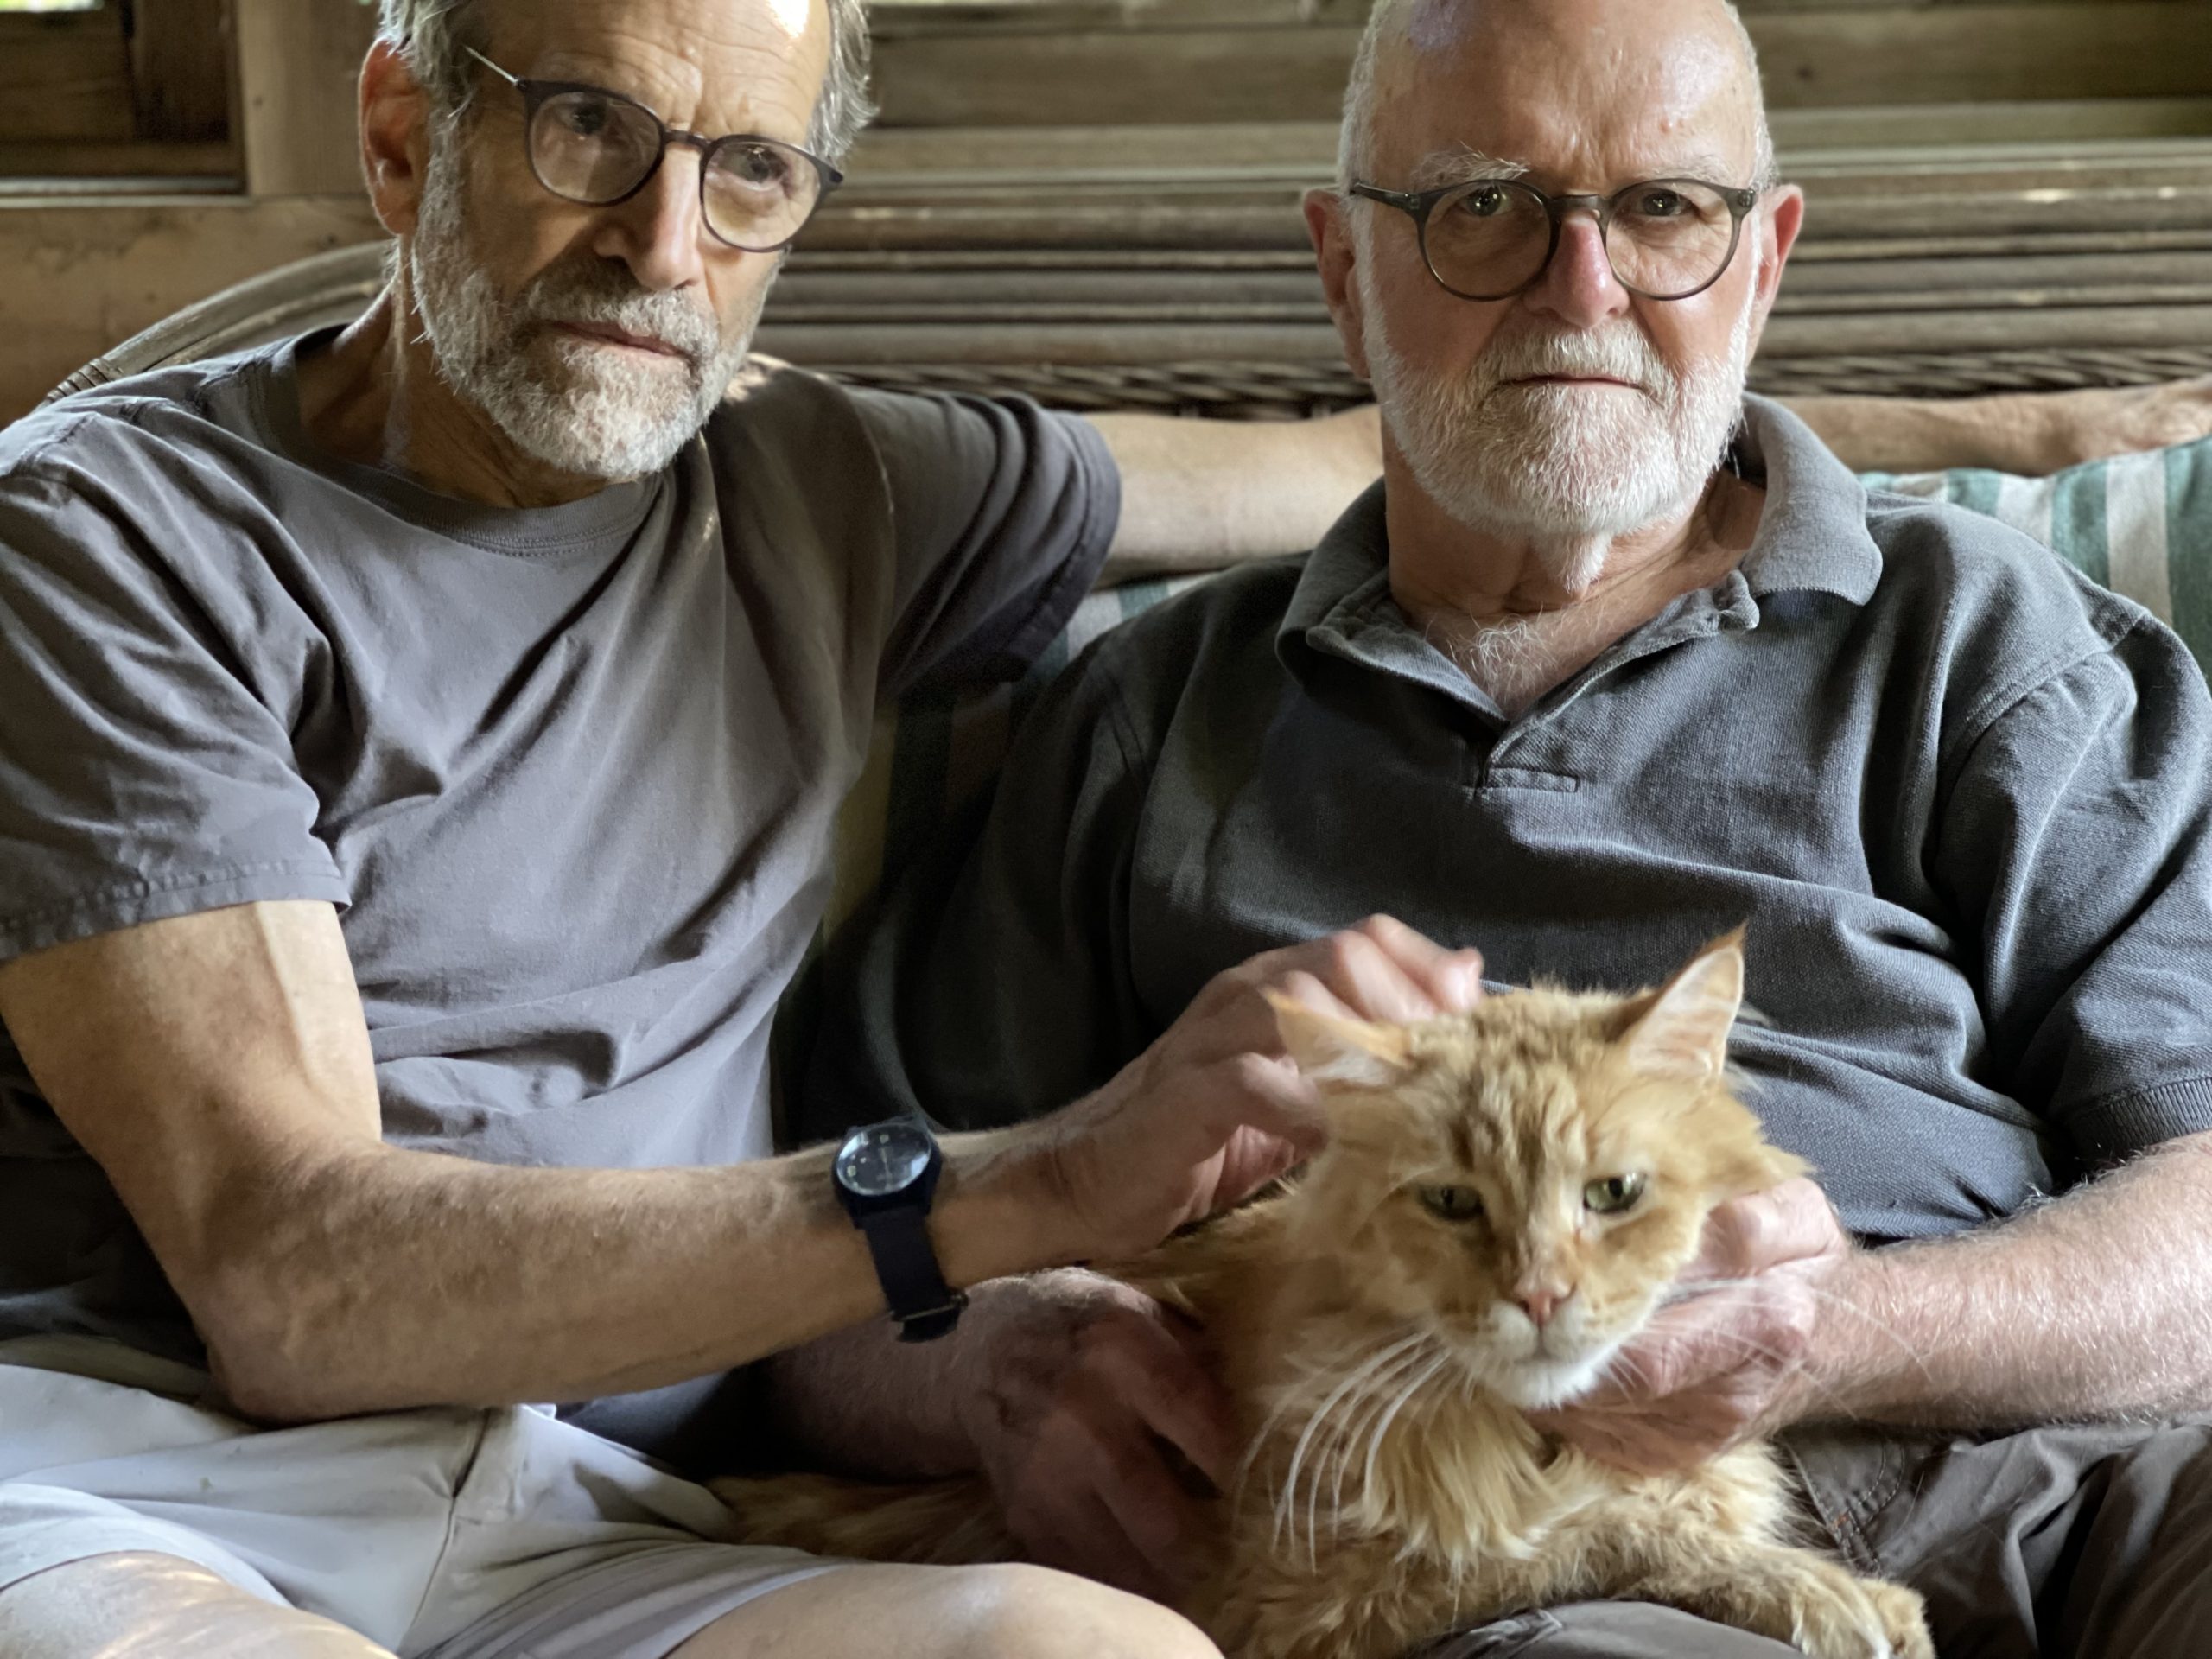 Donald Currie and Daniel Gladstone sitting both in grey shirts with their orange cat on their laps